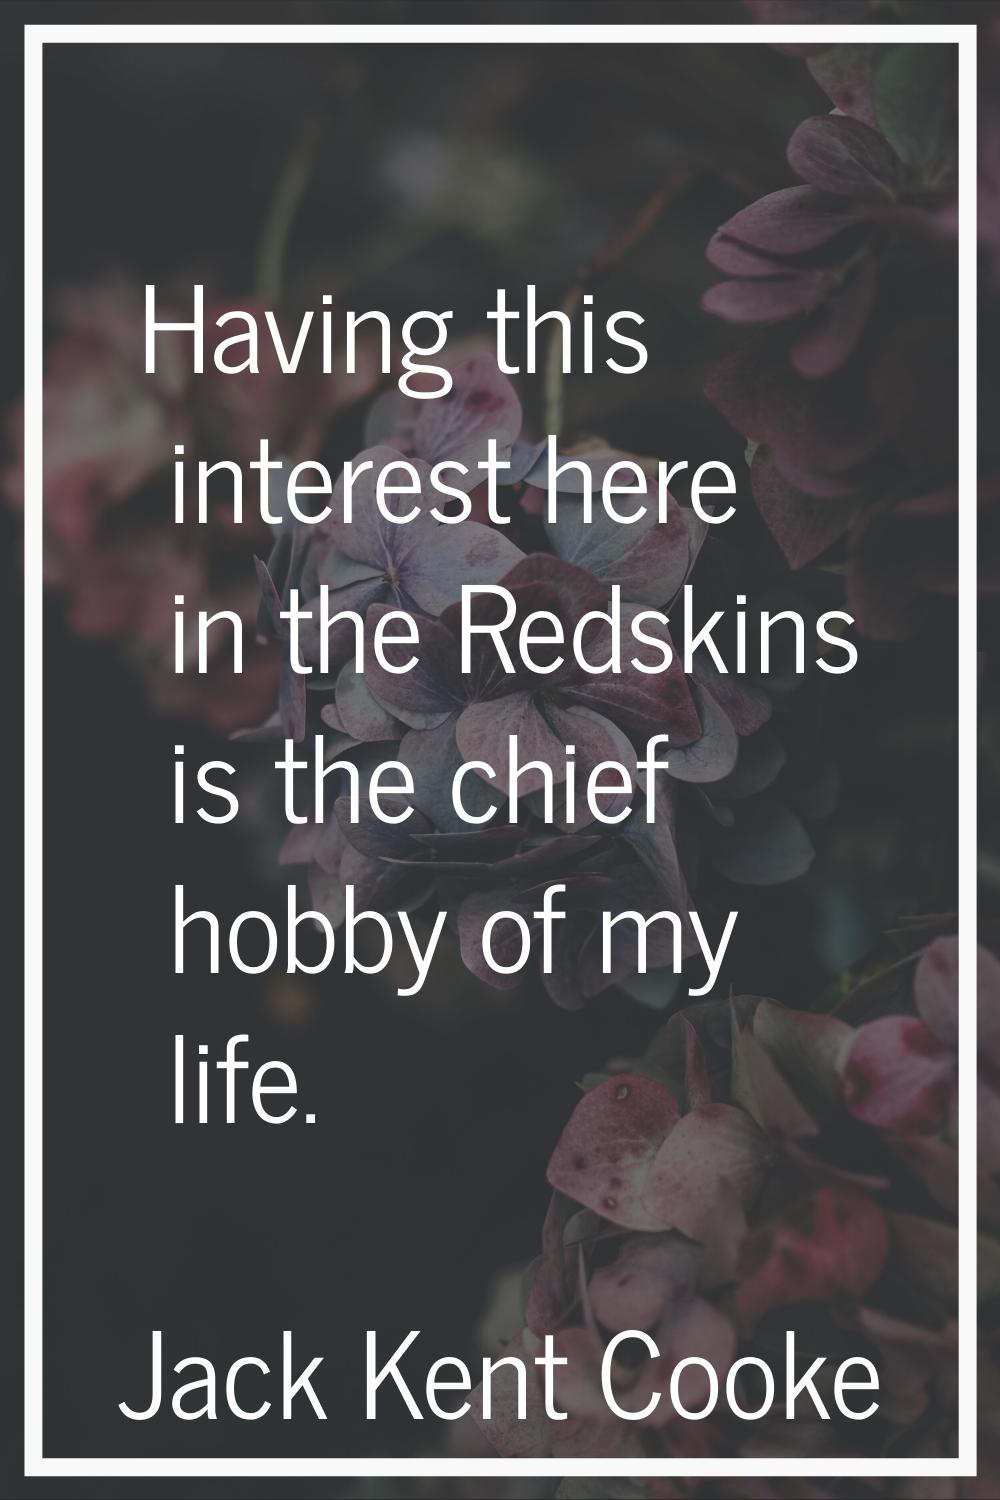 Having this interest here in the Redskins is the chief hobby of my life.